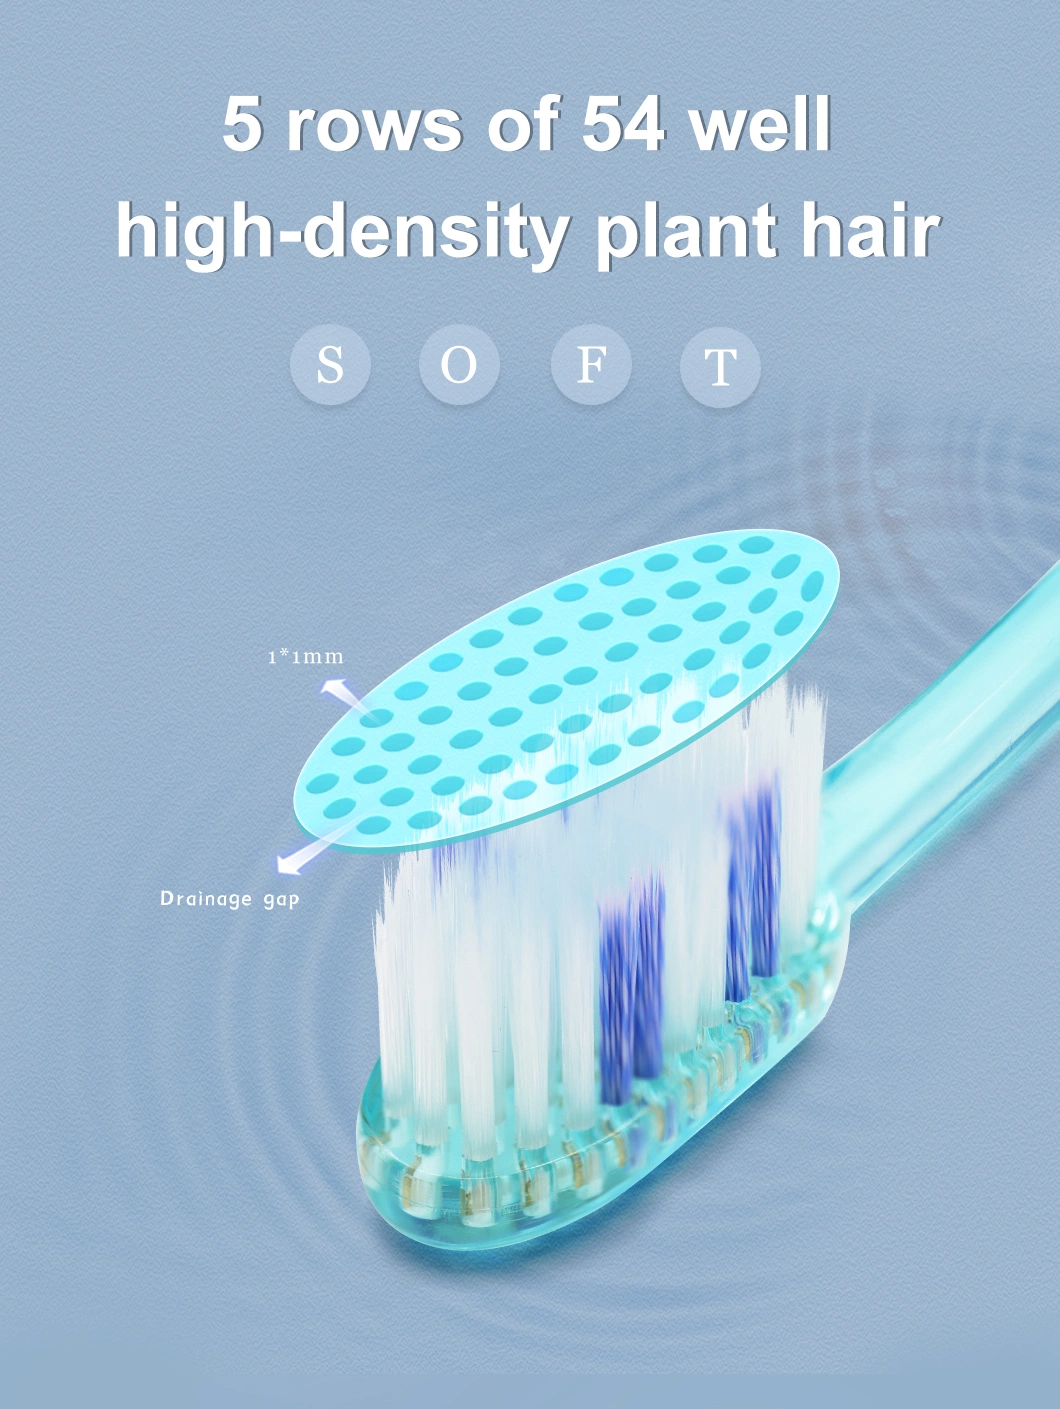 Chinese Style Popular Design Extra Soft Bristle Personal Care Adult Toothbrush